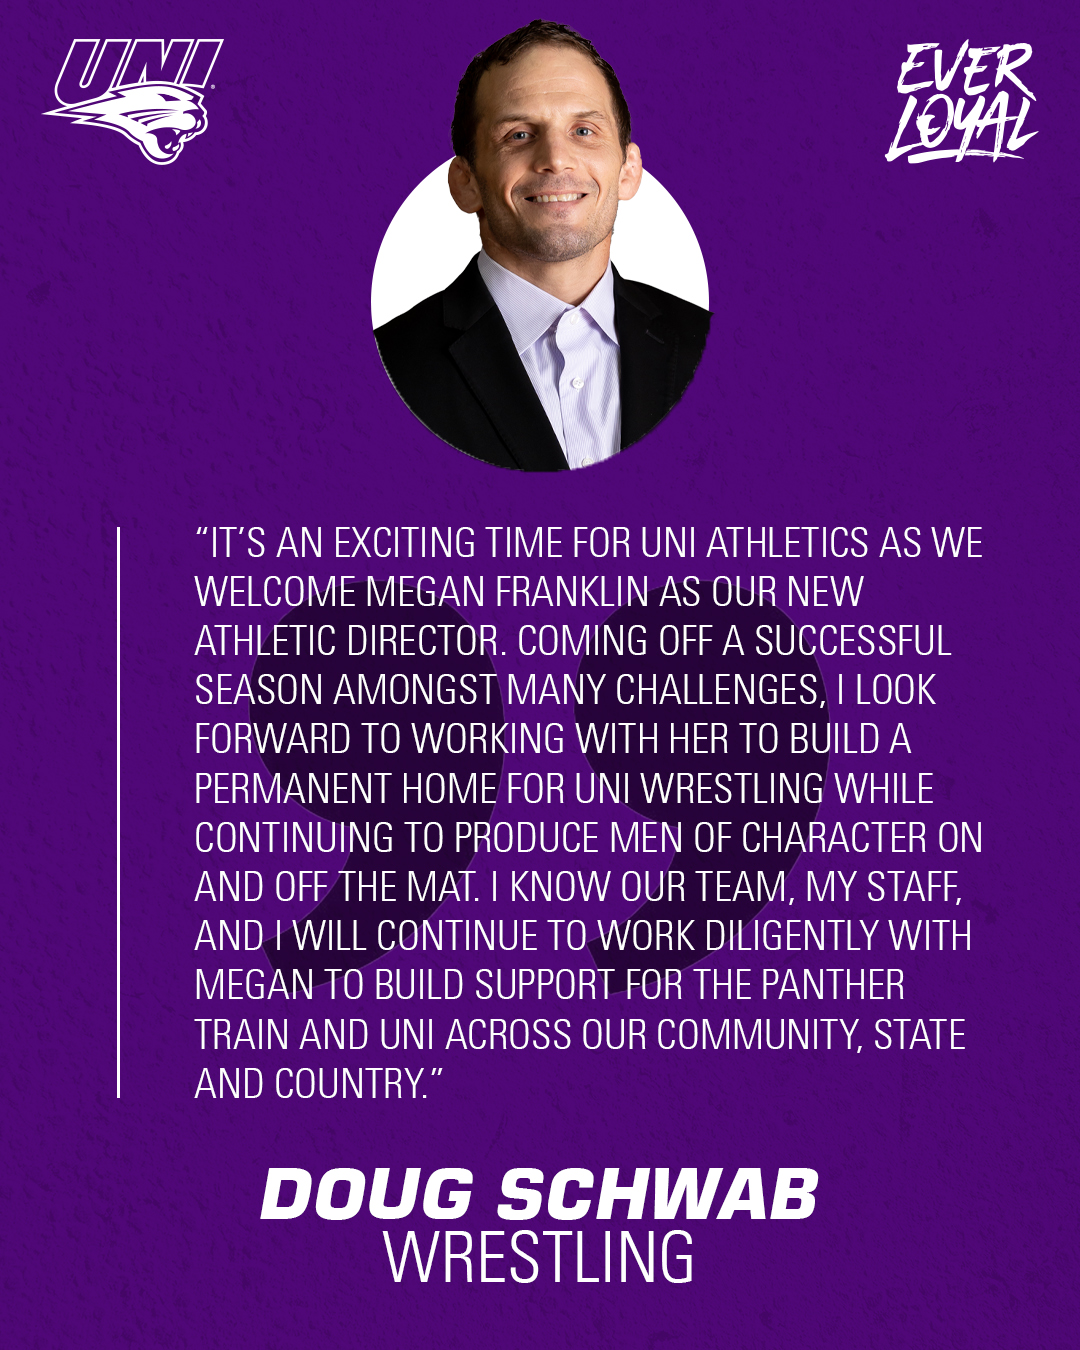 Doug Schwab: “It’s an exciting time for UNI Athletics as we welcome Megan Franklin as our new athletic director. Coming off a successful season amongst many challenges, I look forward to working with her to build a permanent home for UNI Wrestling while continuing to produce men of character on and off the mat. I know our team, my staff, and I will continue to work diligently with Megan to build support for the Panther Train and UNI across our community, state and country.”